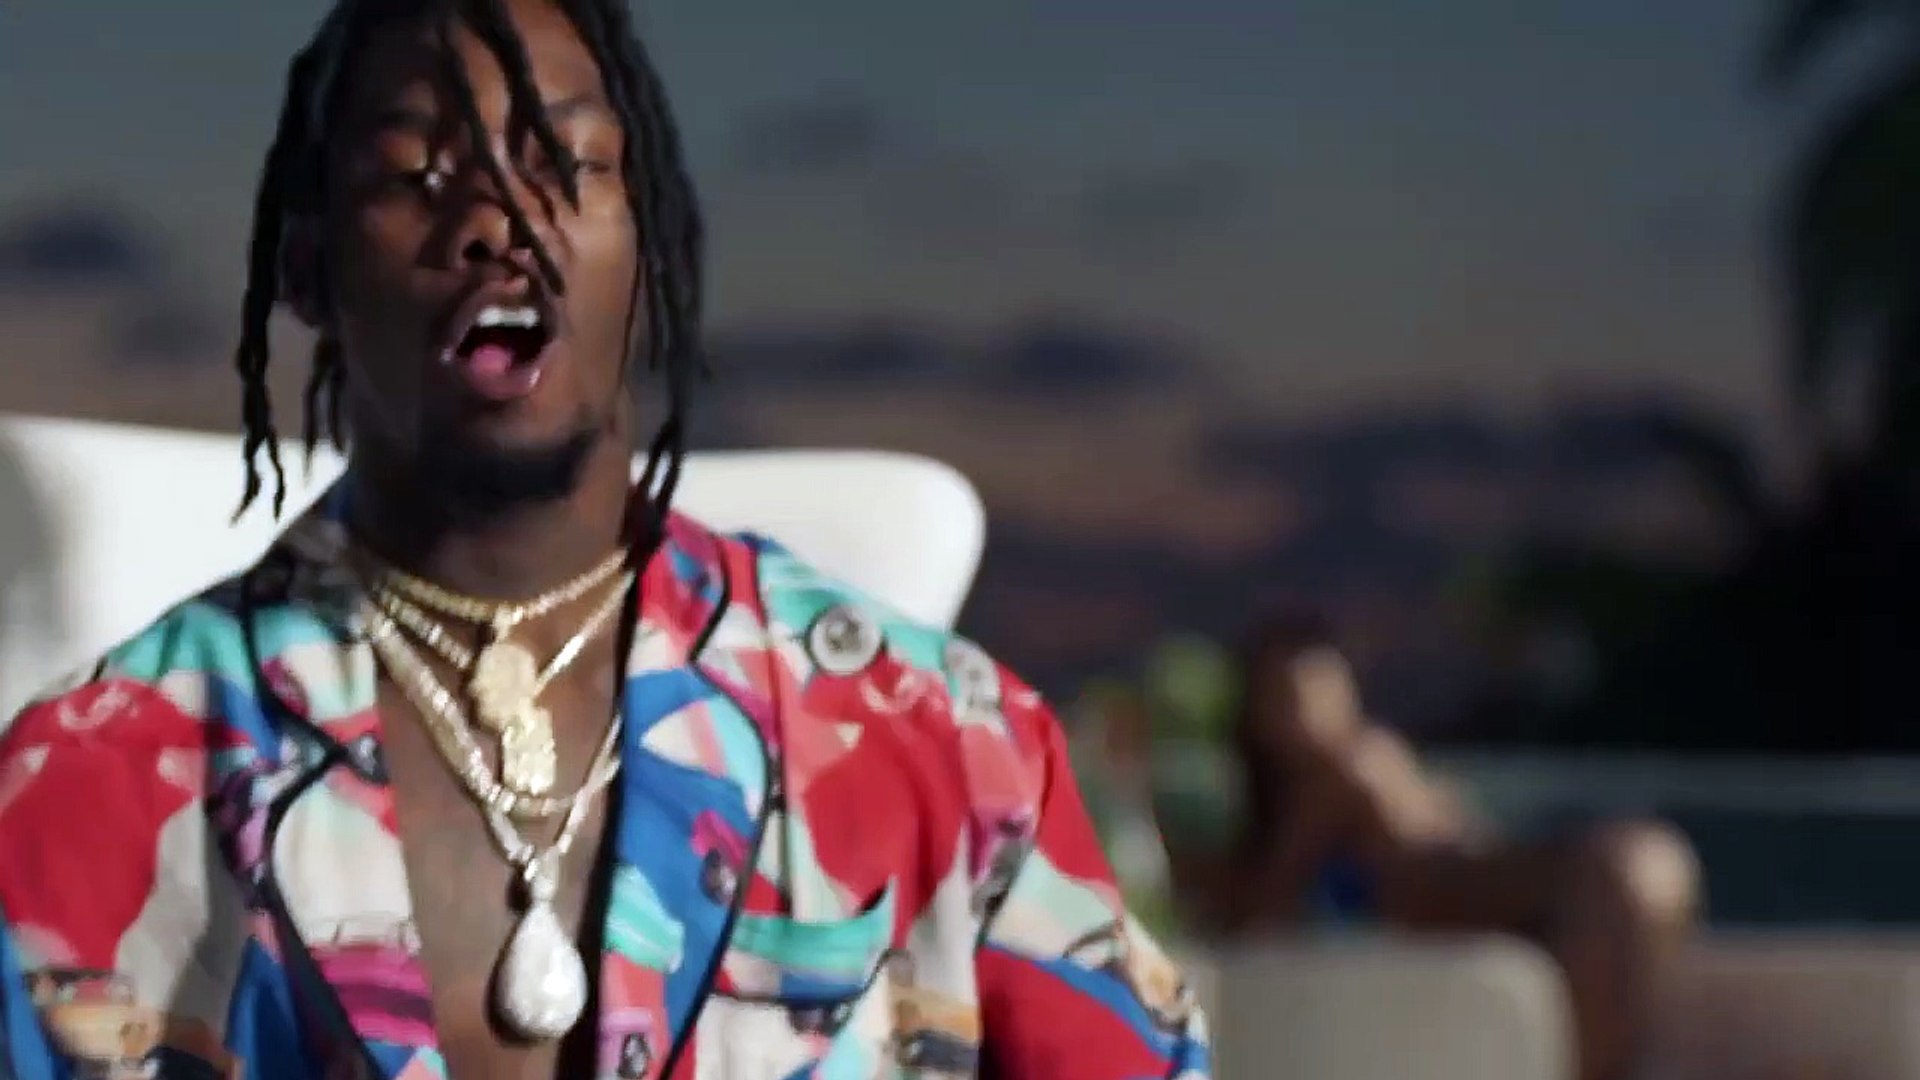 Migos - Slippery feat. Gucci Mane [Official Video] - video Dailymotion